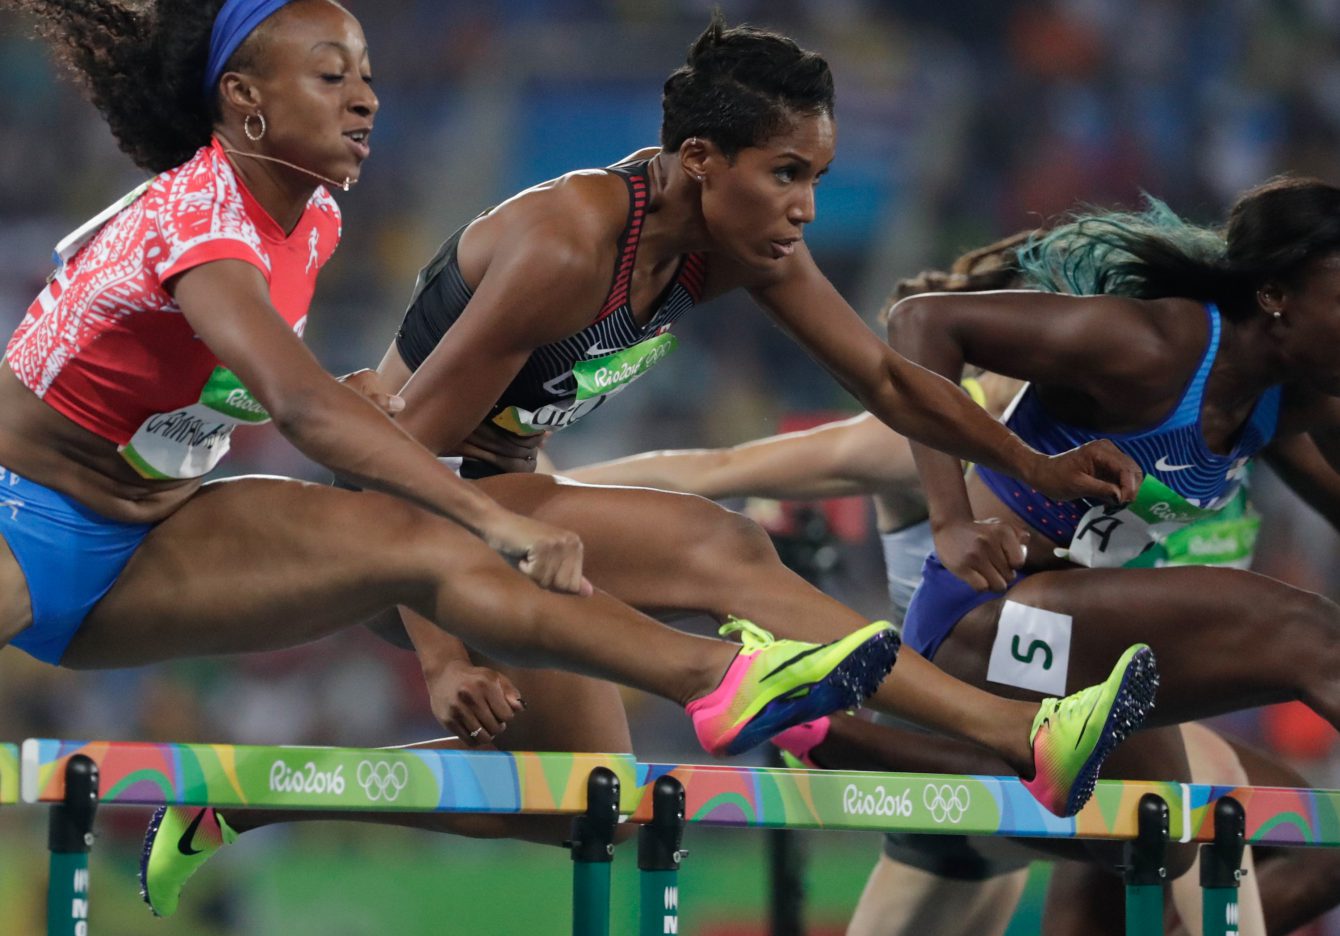 Several women leaping over hurdles